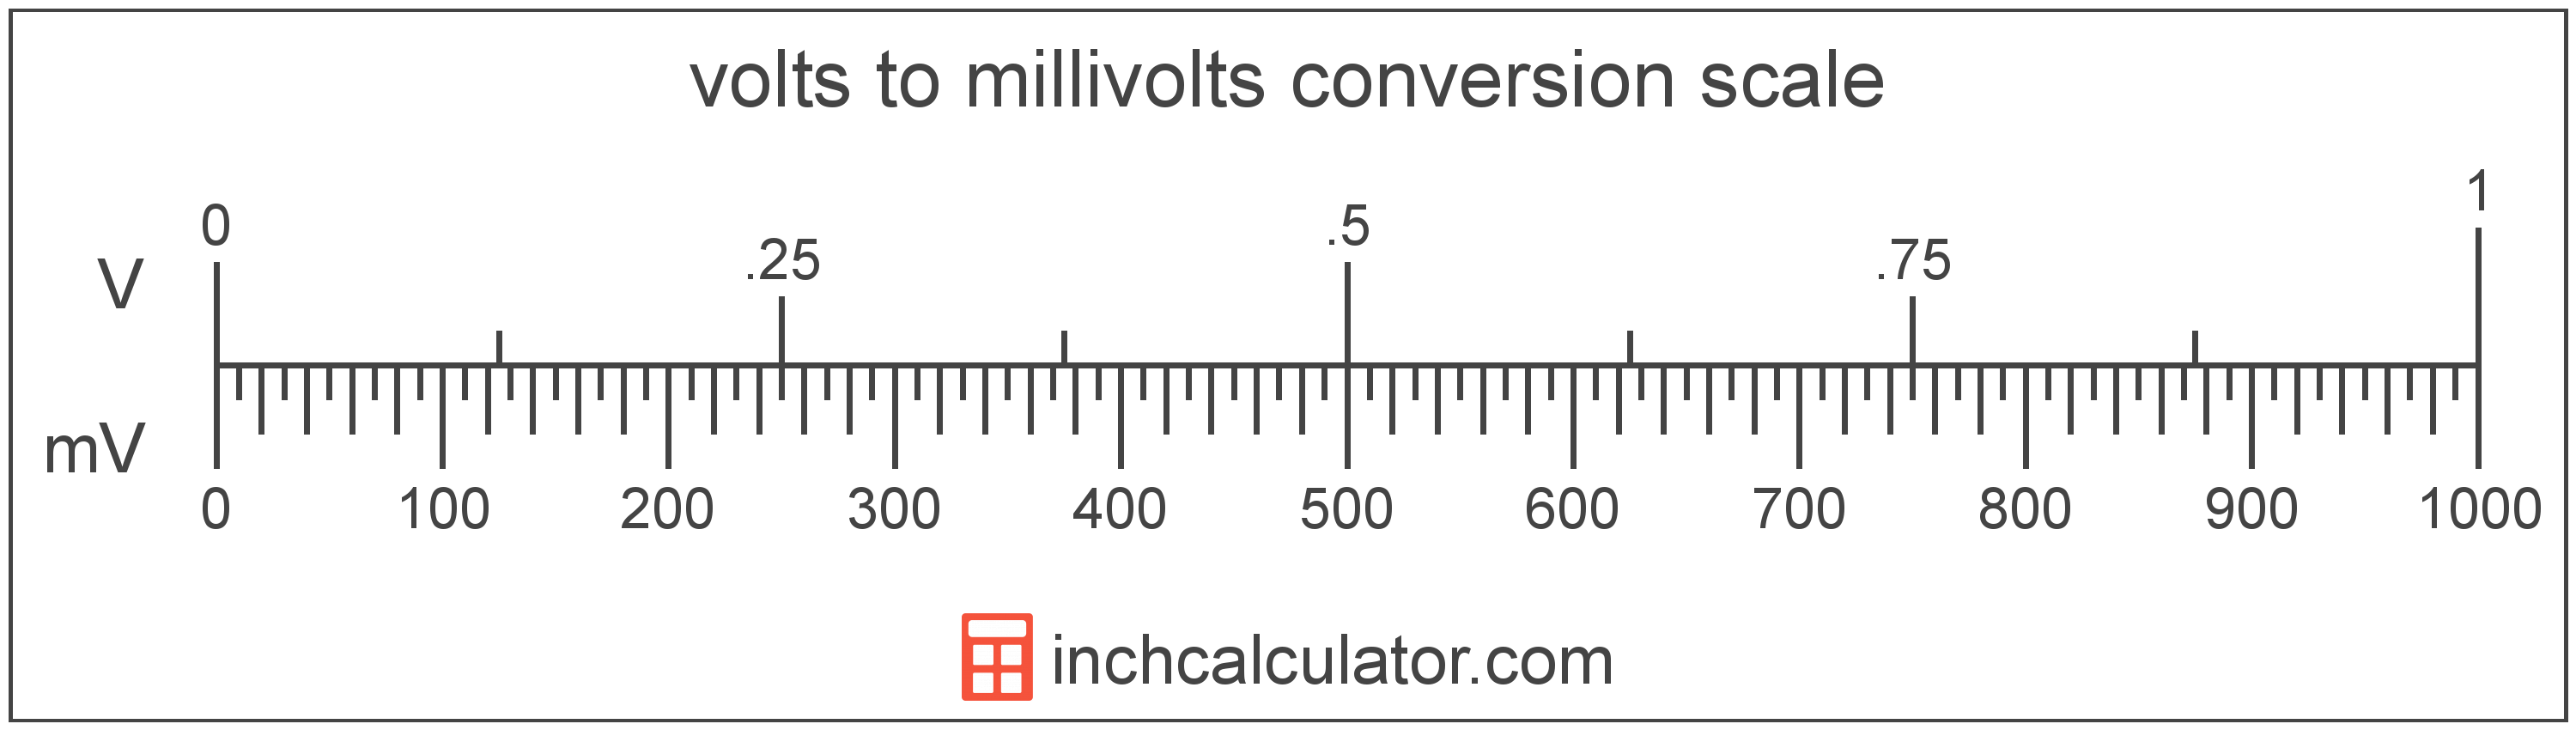 conversion scale showing volts and equivalent millivolts voltage values